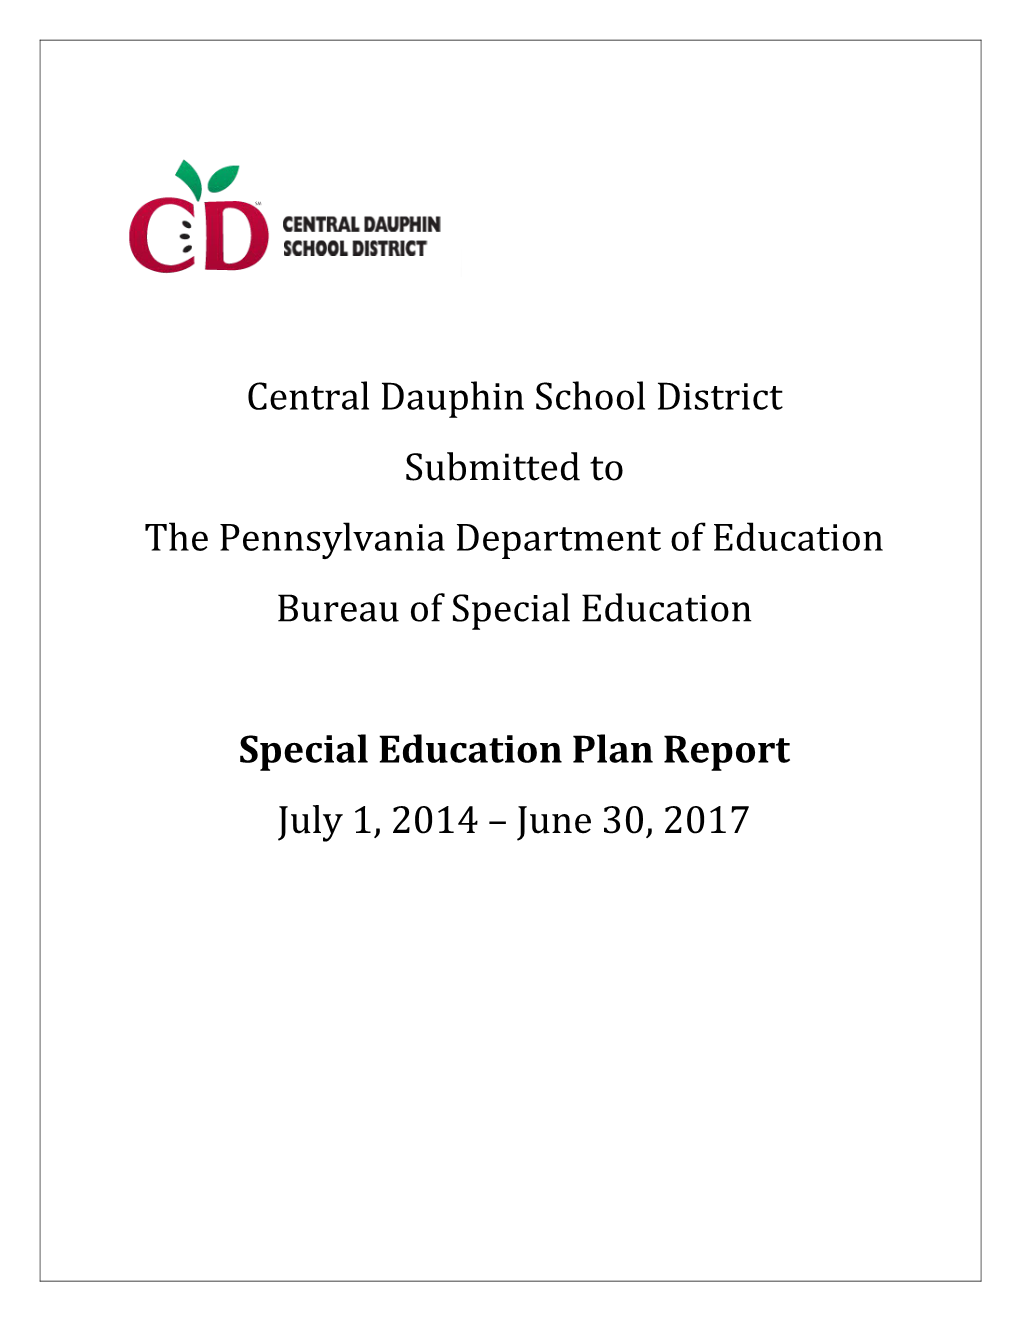 Central Dauphin School District